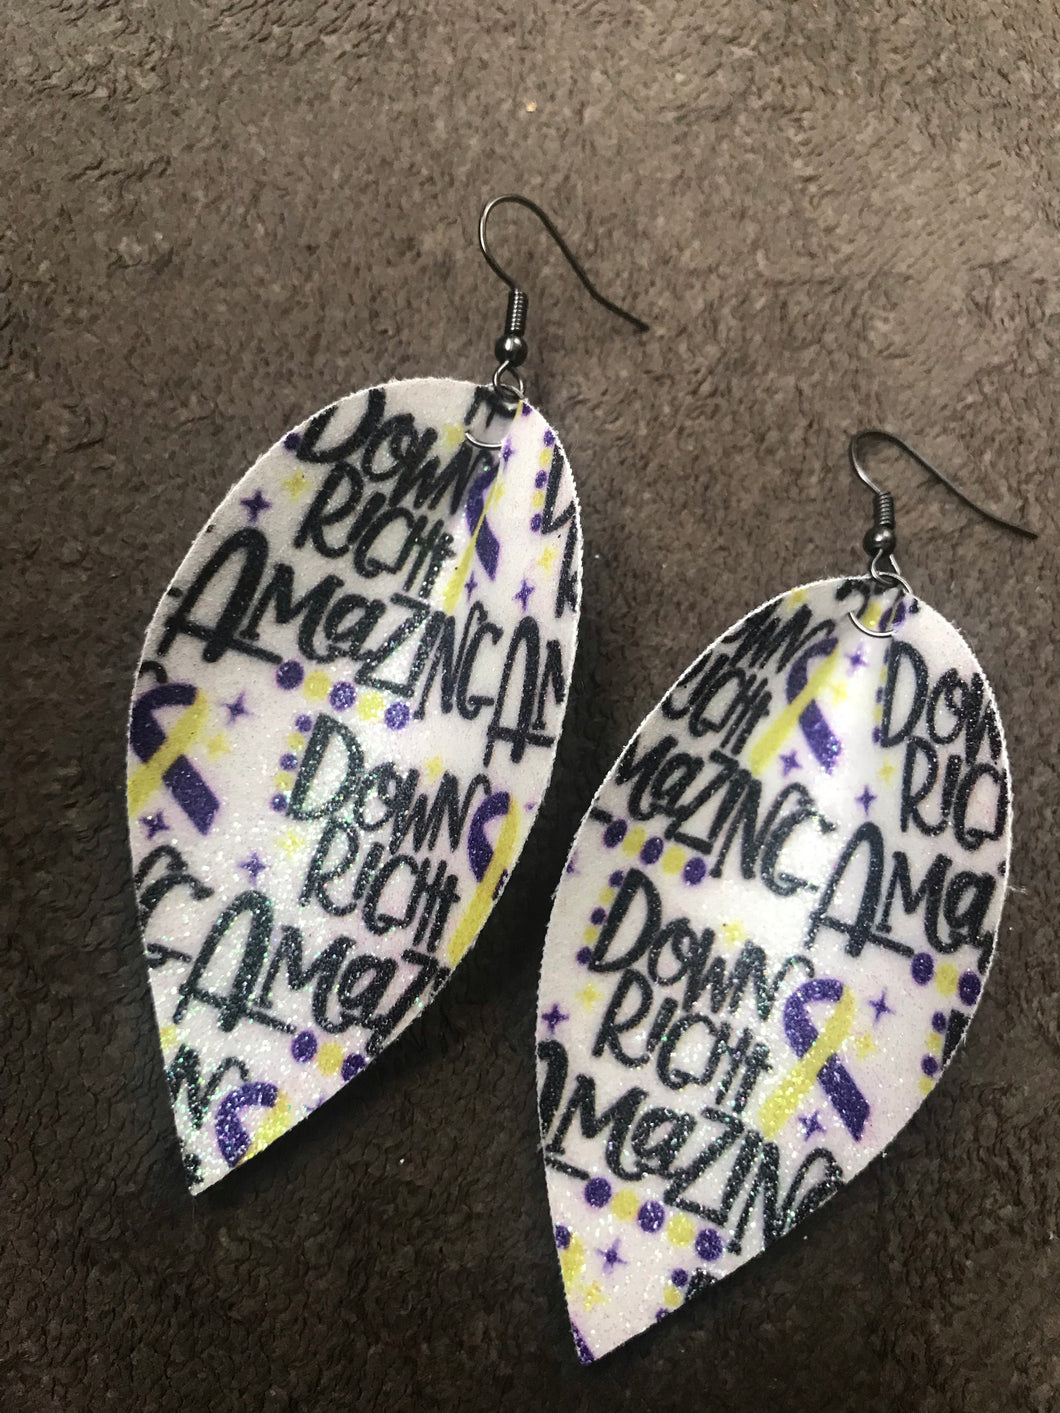 Sparkly Down Syndrome Awareness Earrings